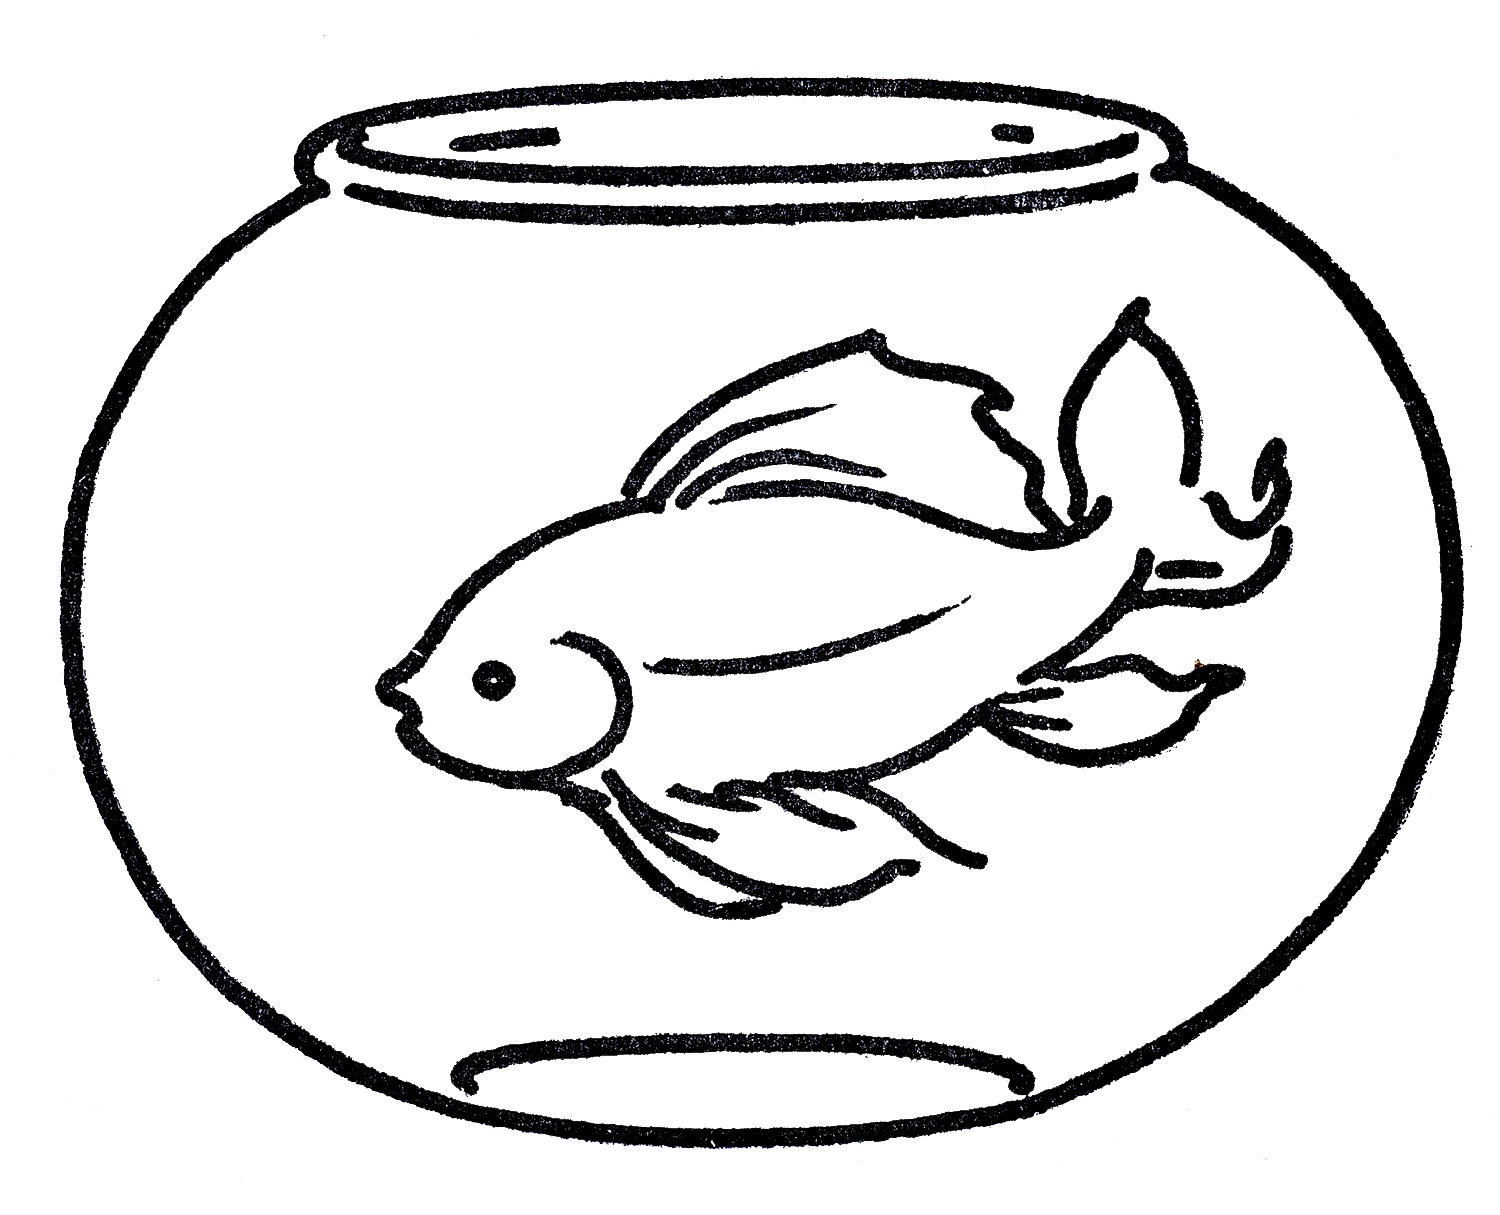 Tropical Fish Black And White Clipart   Clipart Panda   Free Clipart